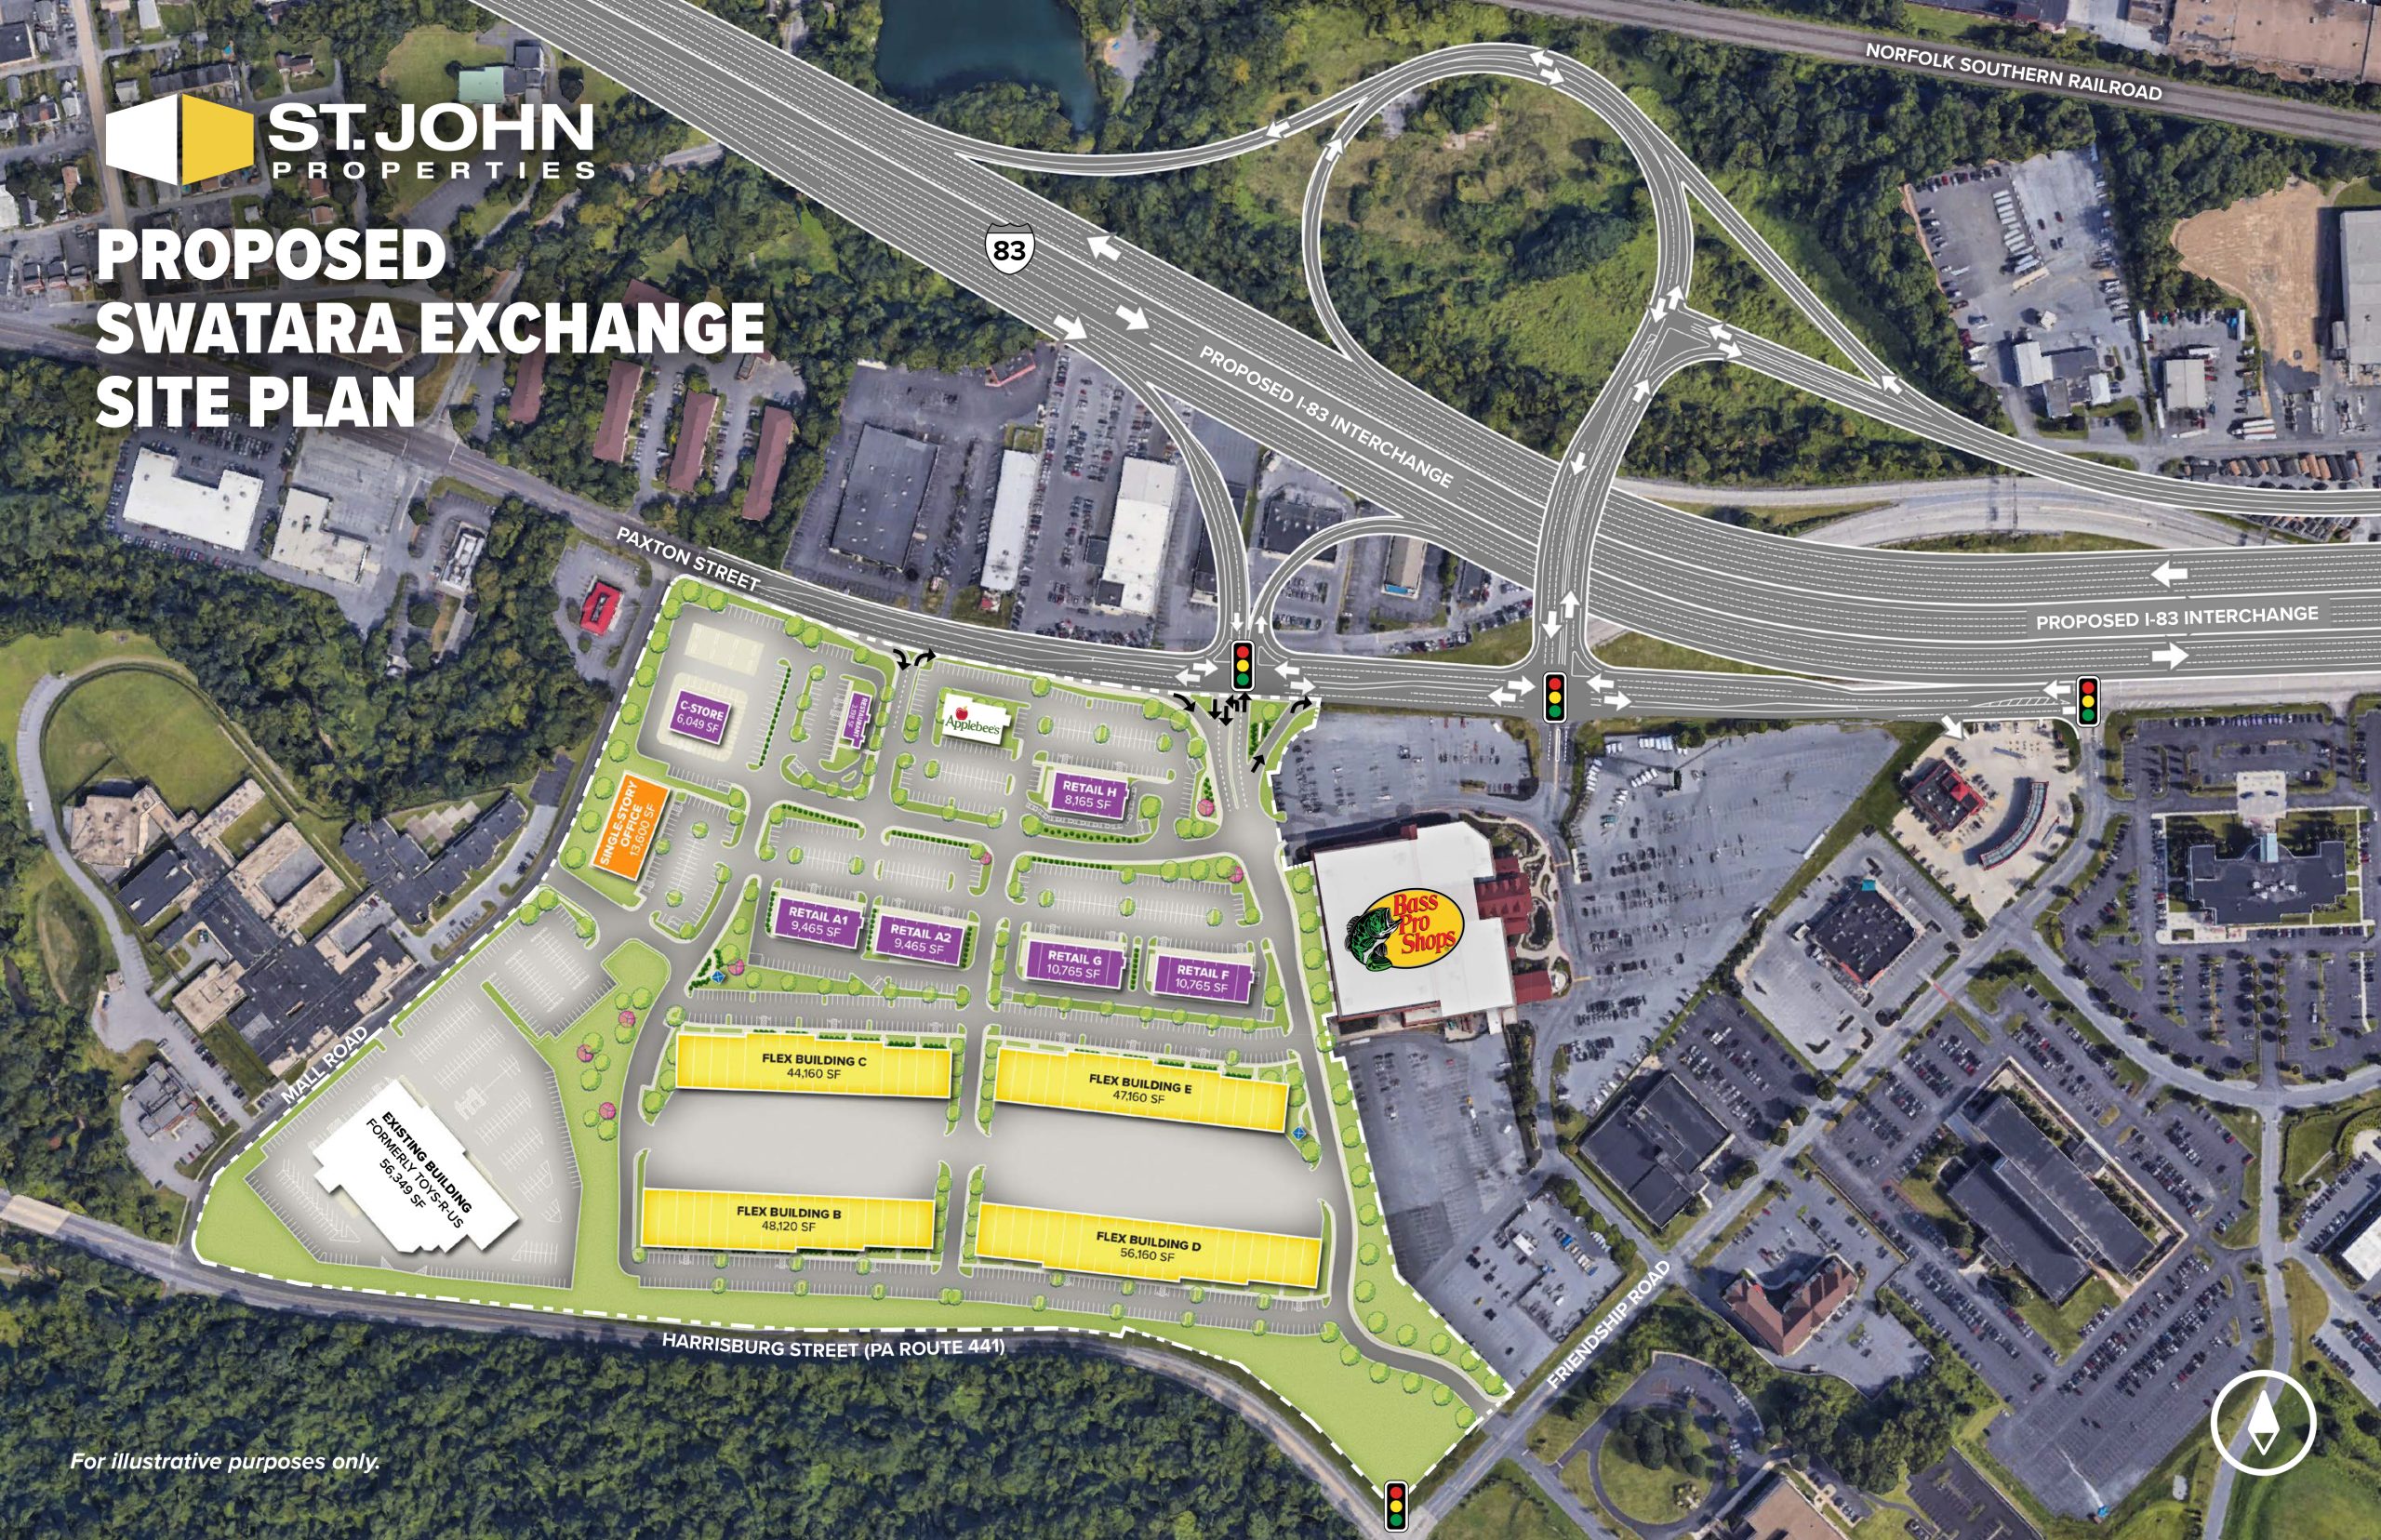 St. John Properties plans to redevelop Harrisburg Mall into Swatara Exchange, a 550,000 square foot mixed-use business community.